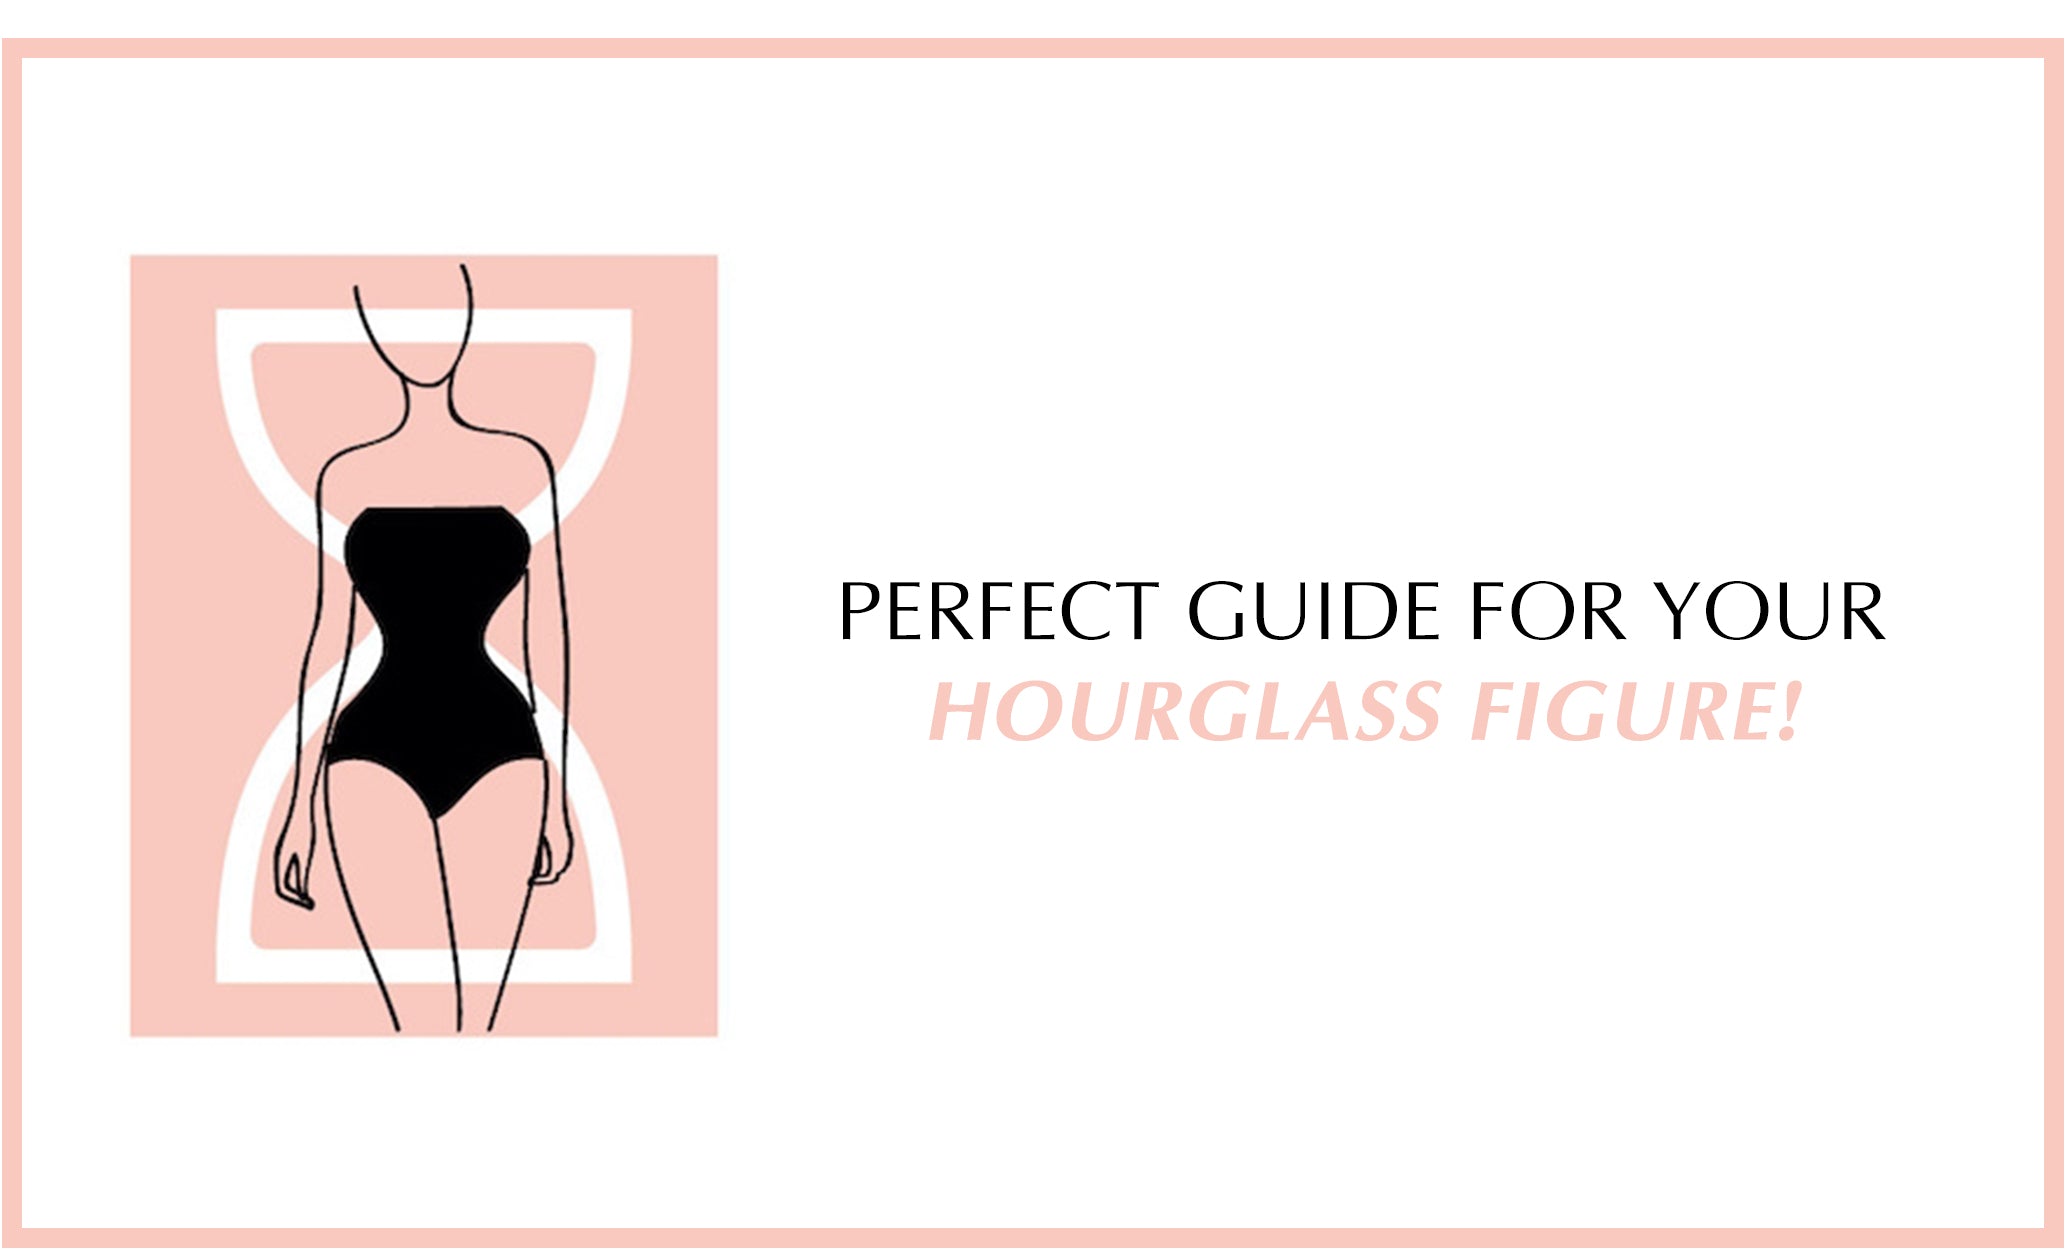 Perfect guide for your Hourglass figure!